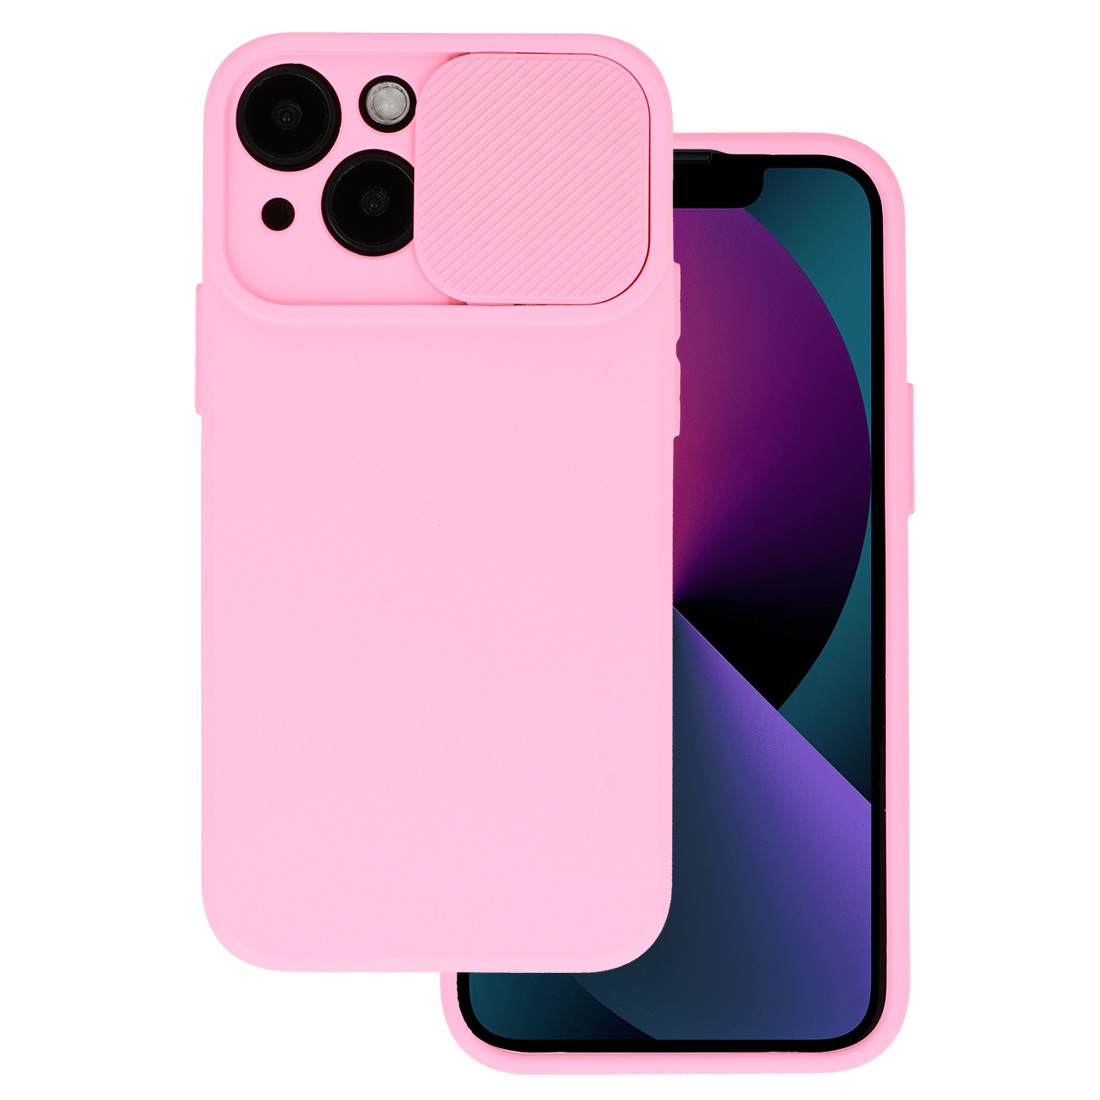 Samsung Galaxy A12 (SM-A125F/DSN) Case Cover with Camshield, Pink